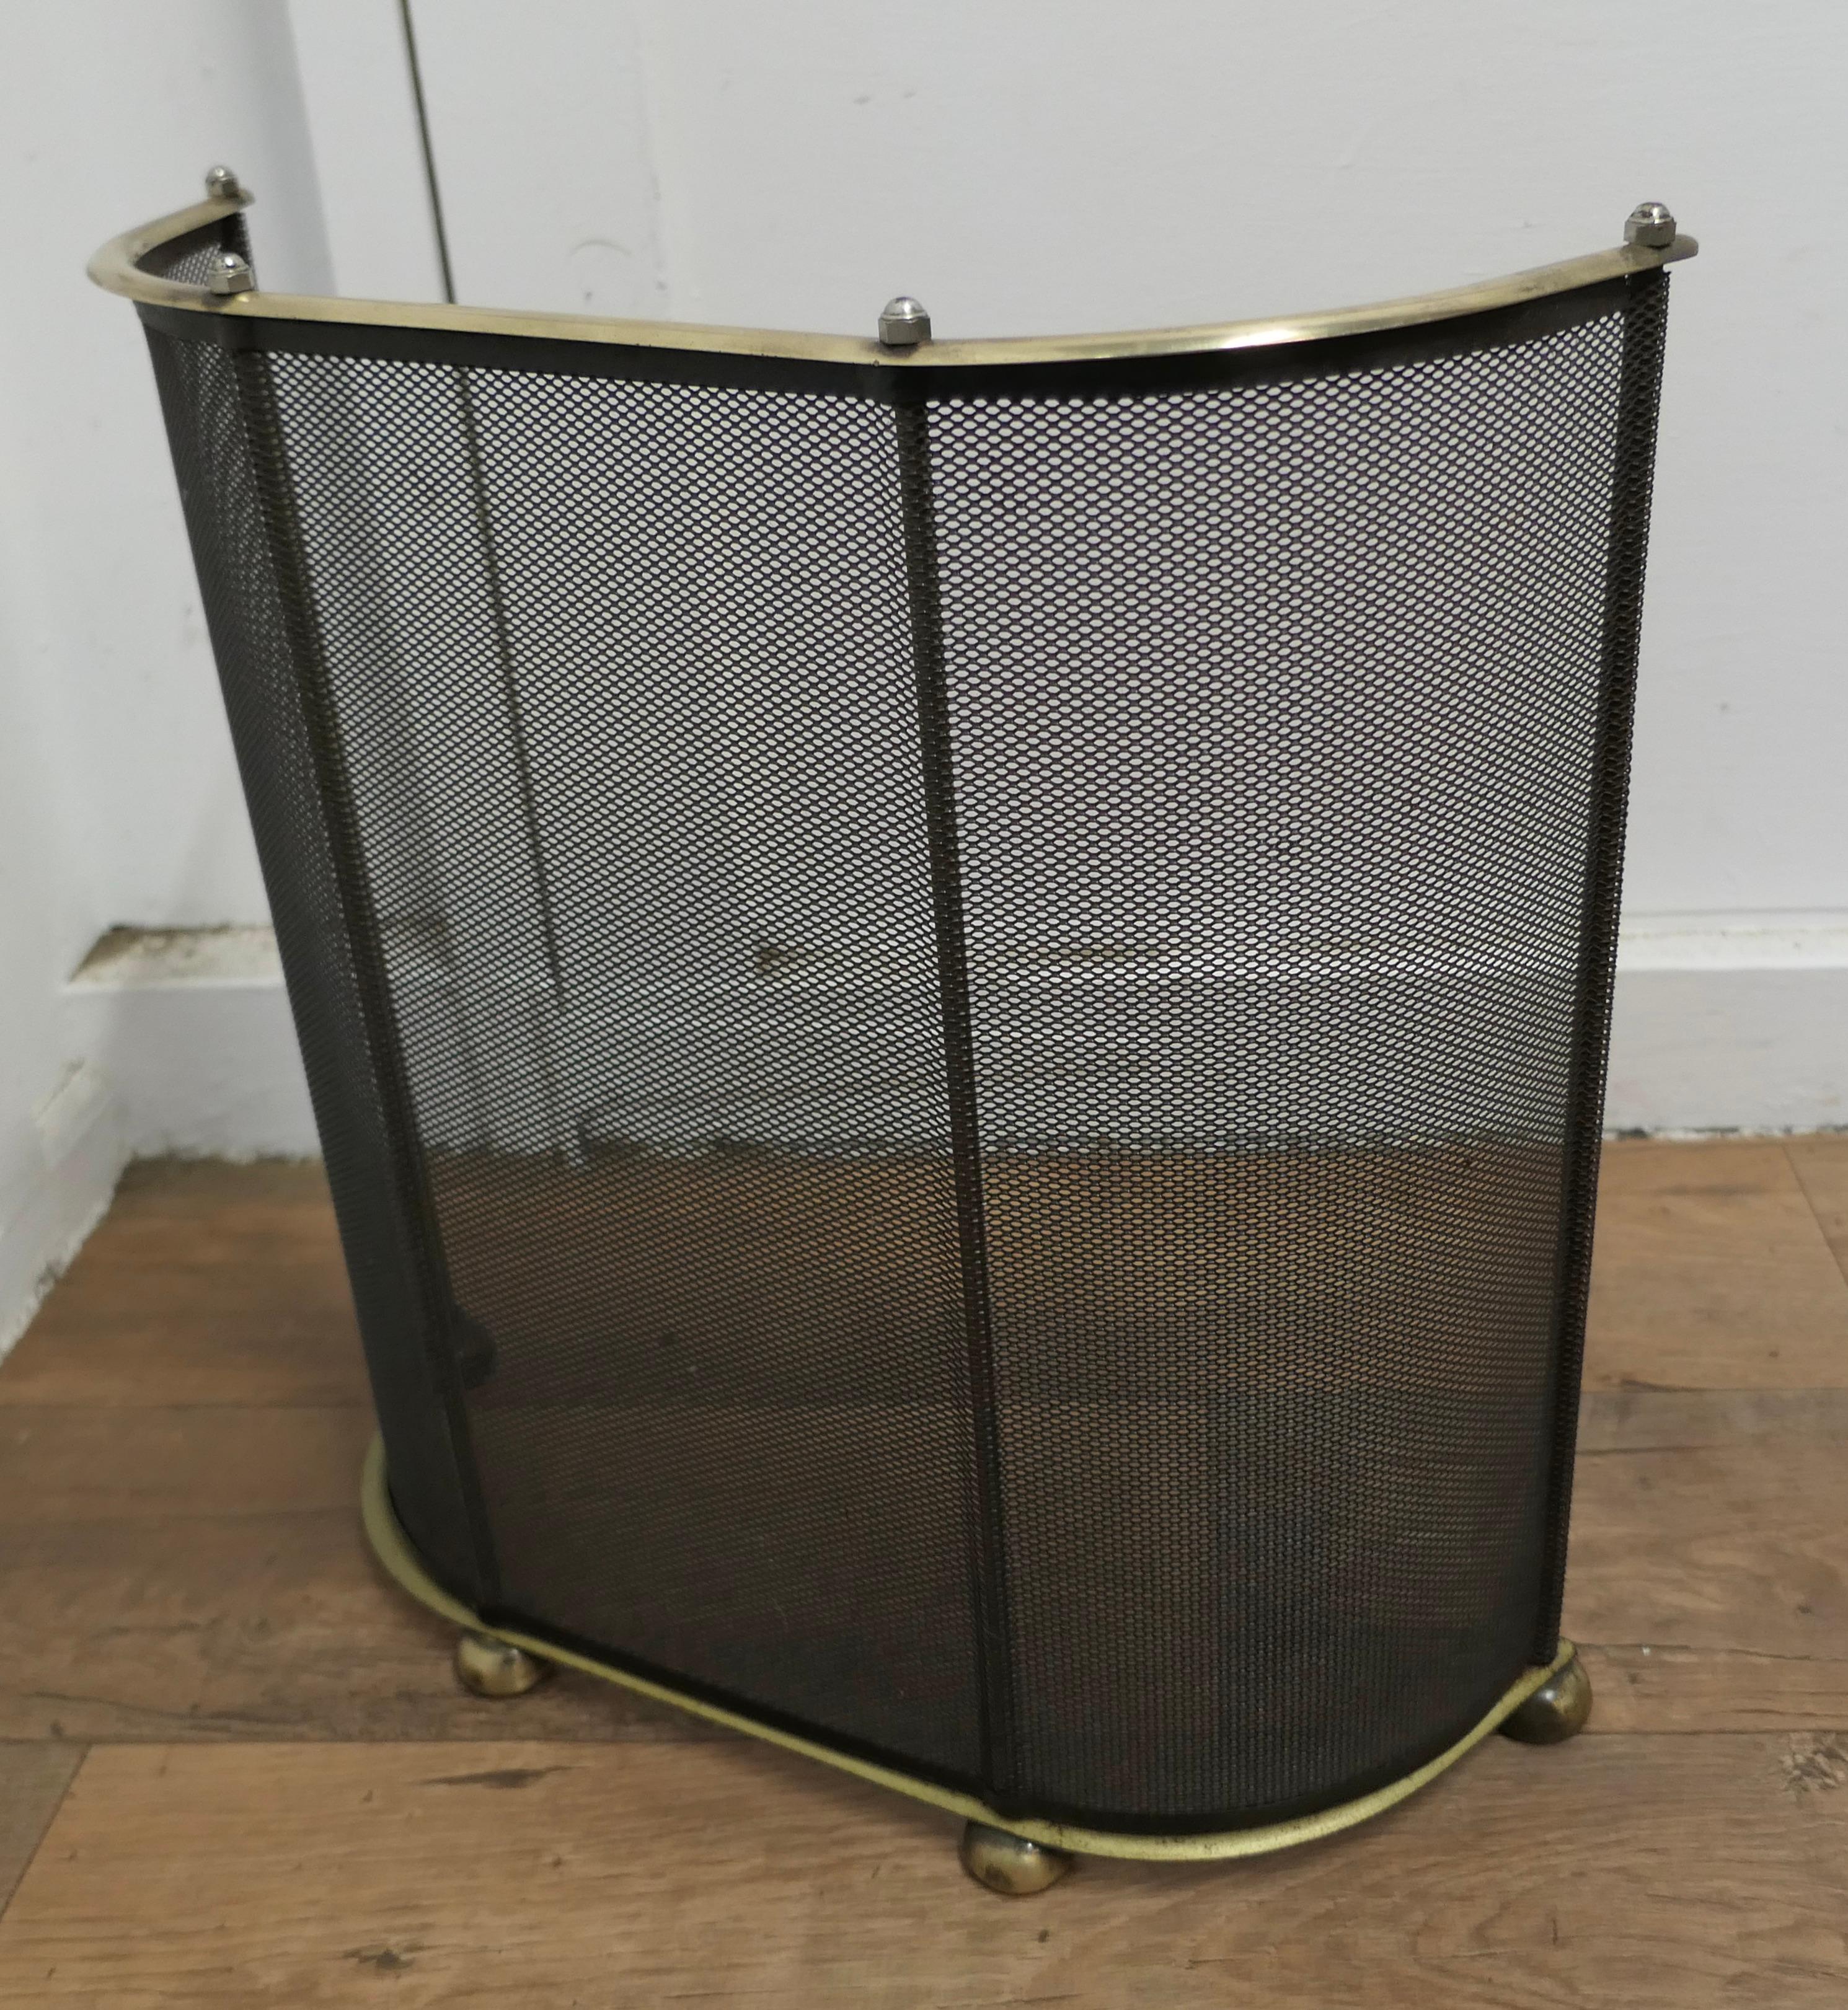  Curved Brass and Iron Nursery Fire Guard    In Good Condition For Sale In Chillerton, Isle of Wight